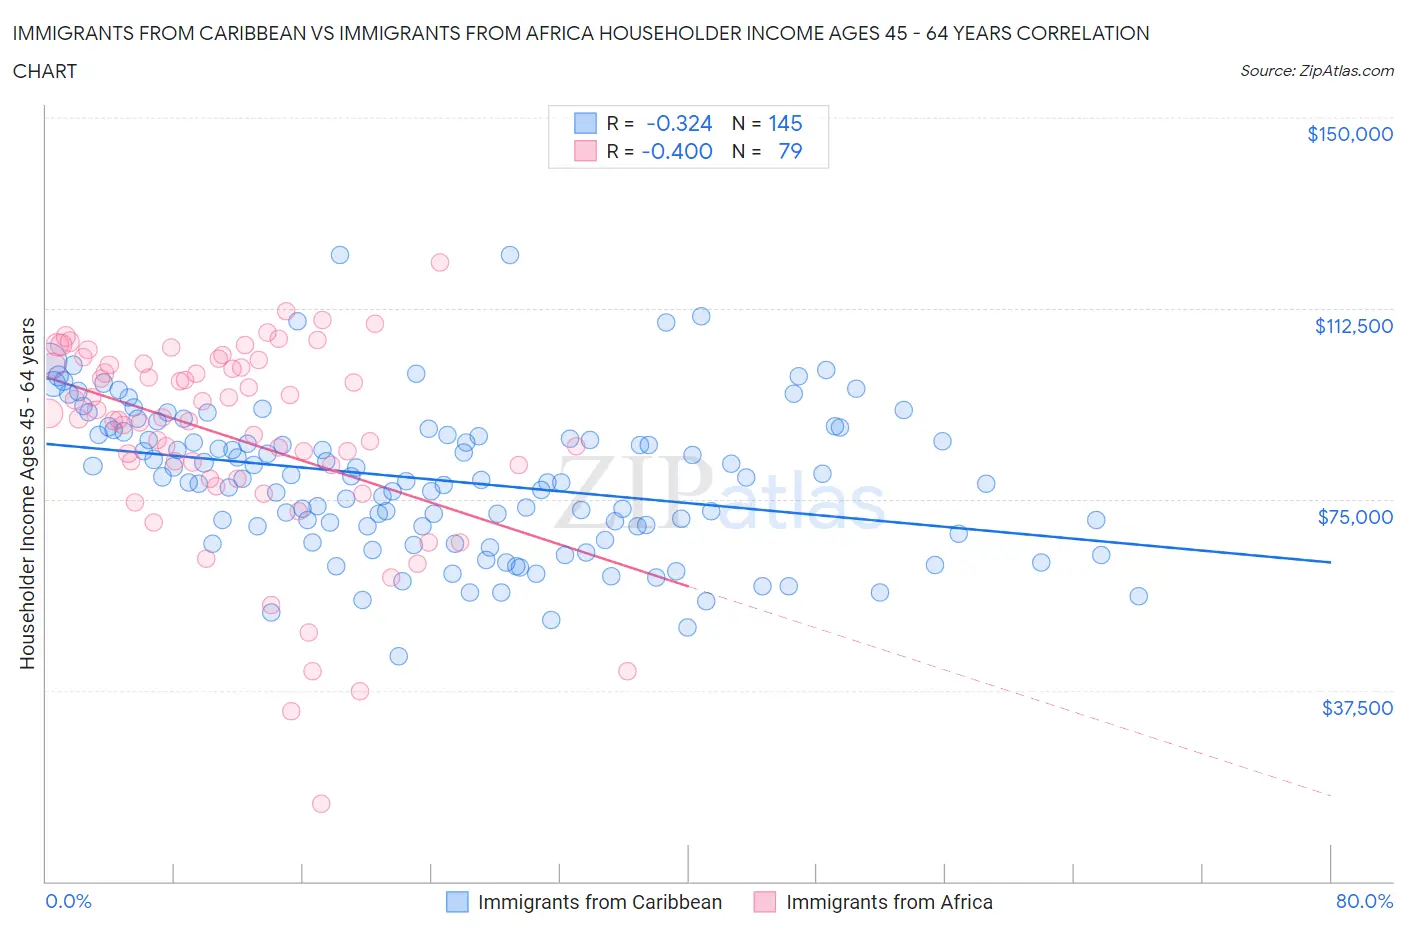 Immigrants from Caribbean vs Immigrants from Africa Householder Income Ages 45 - 64 years